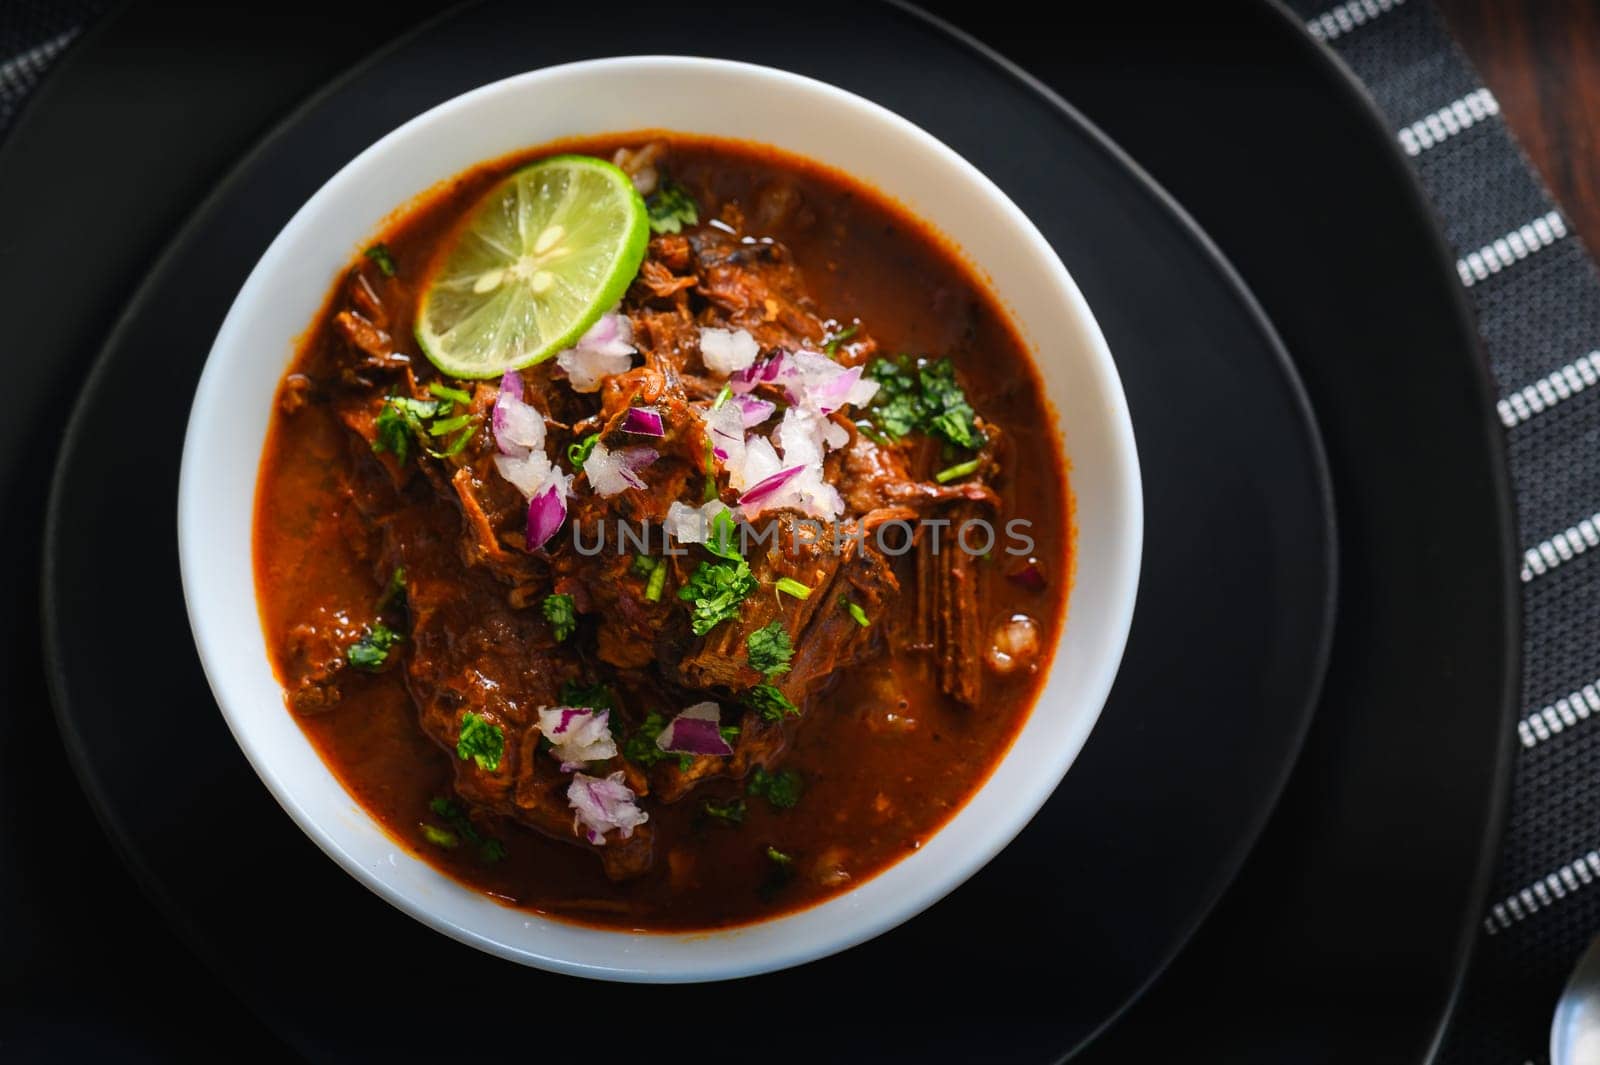 Bowl of Mexican Beef Birria Stew on Black Plates by RobertPB